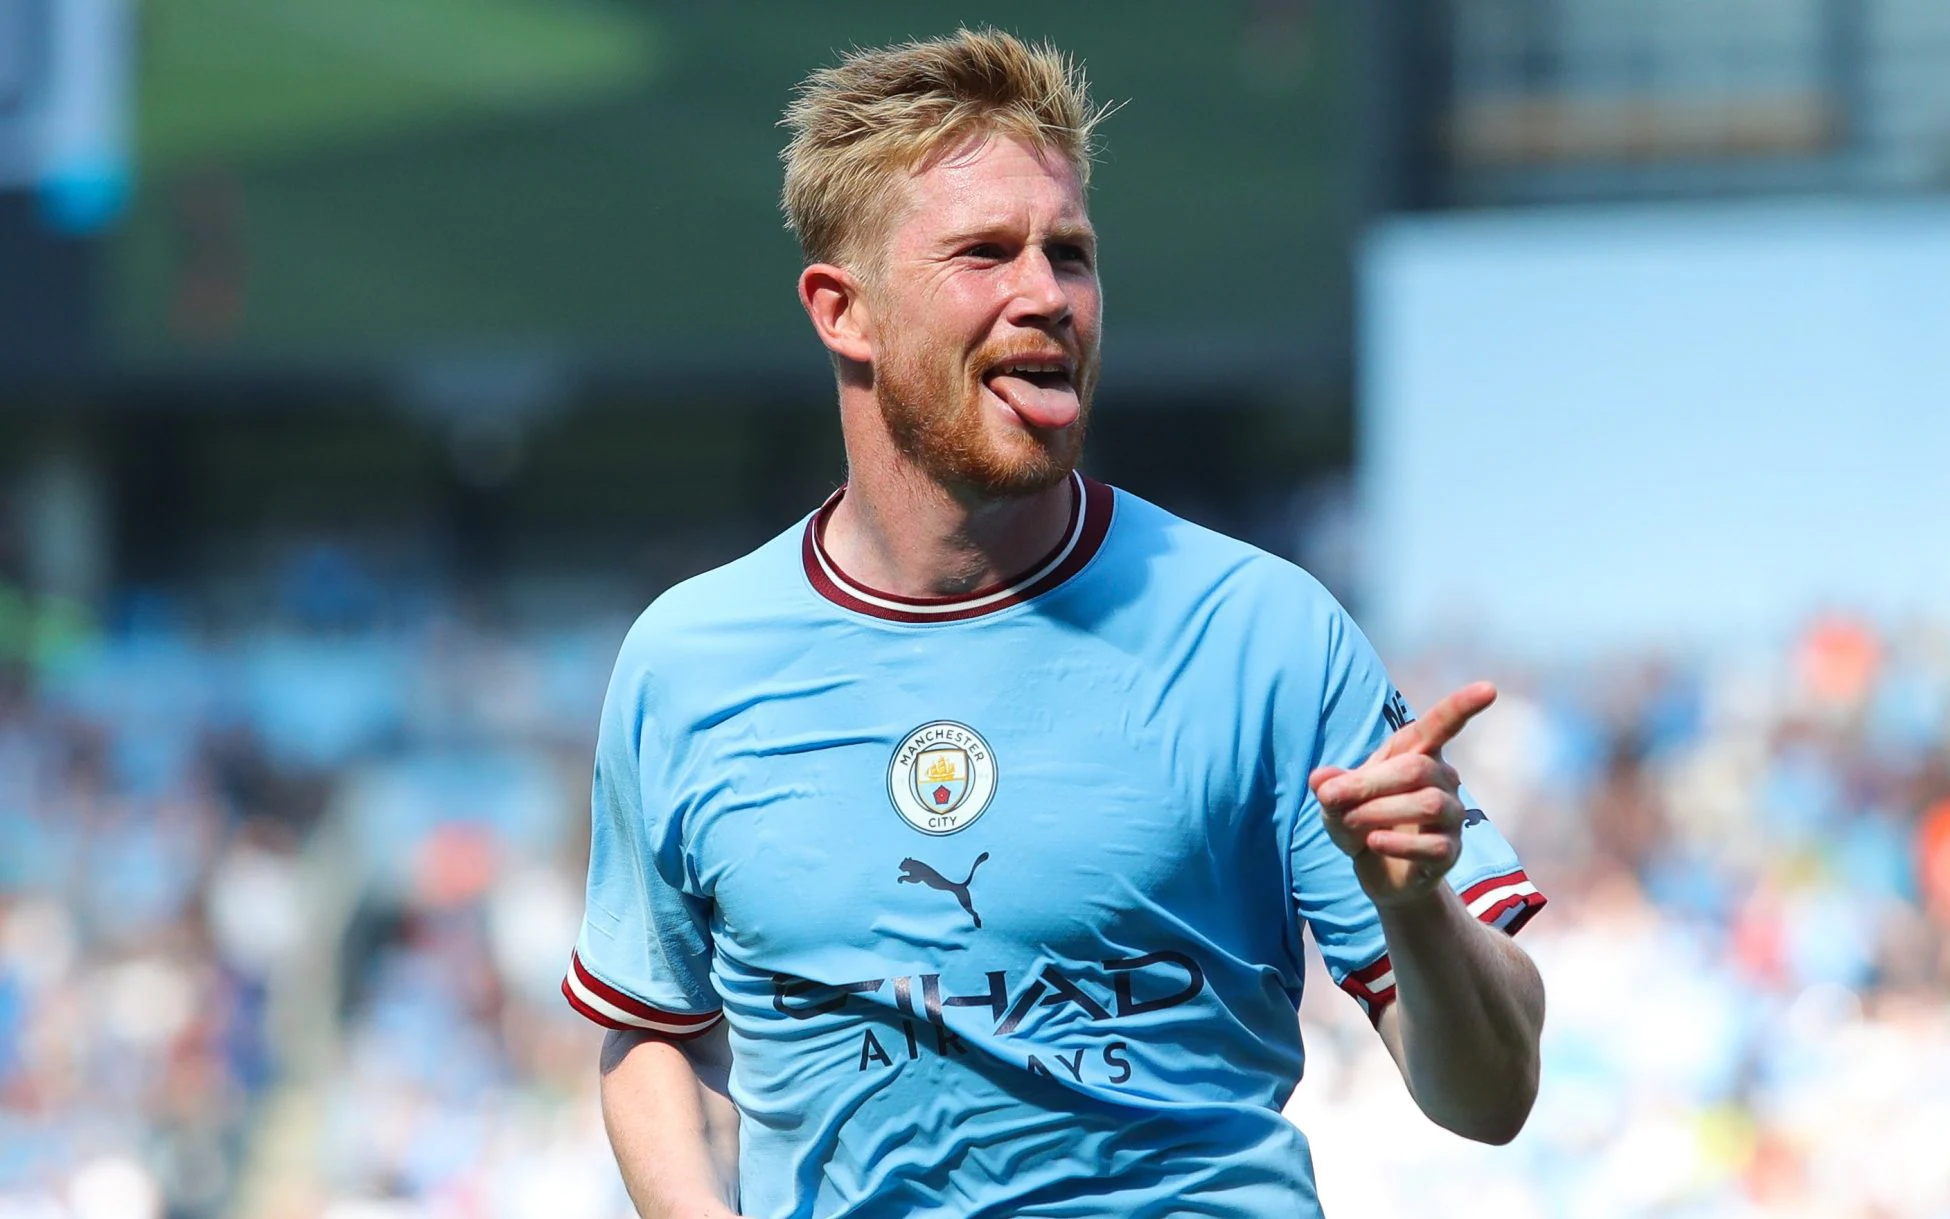 Kevin De Bruyne is on top of the best attacking midfielders list